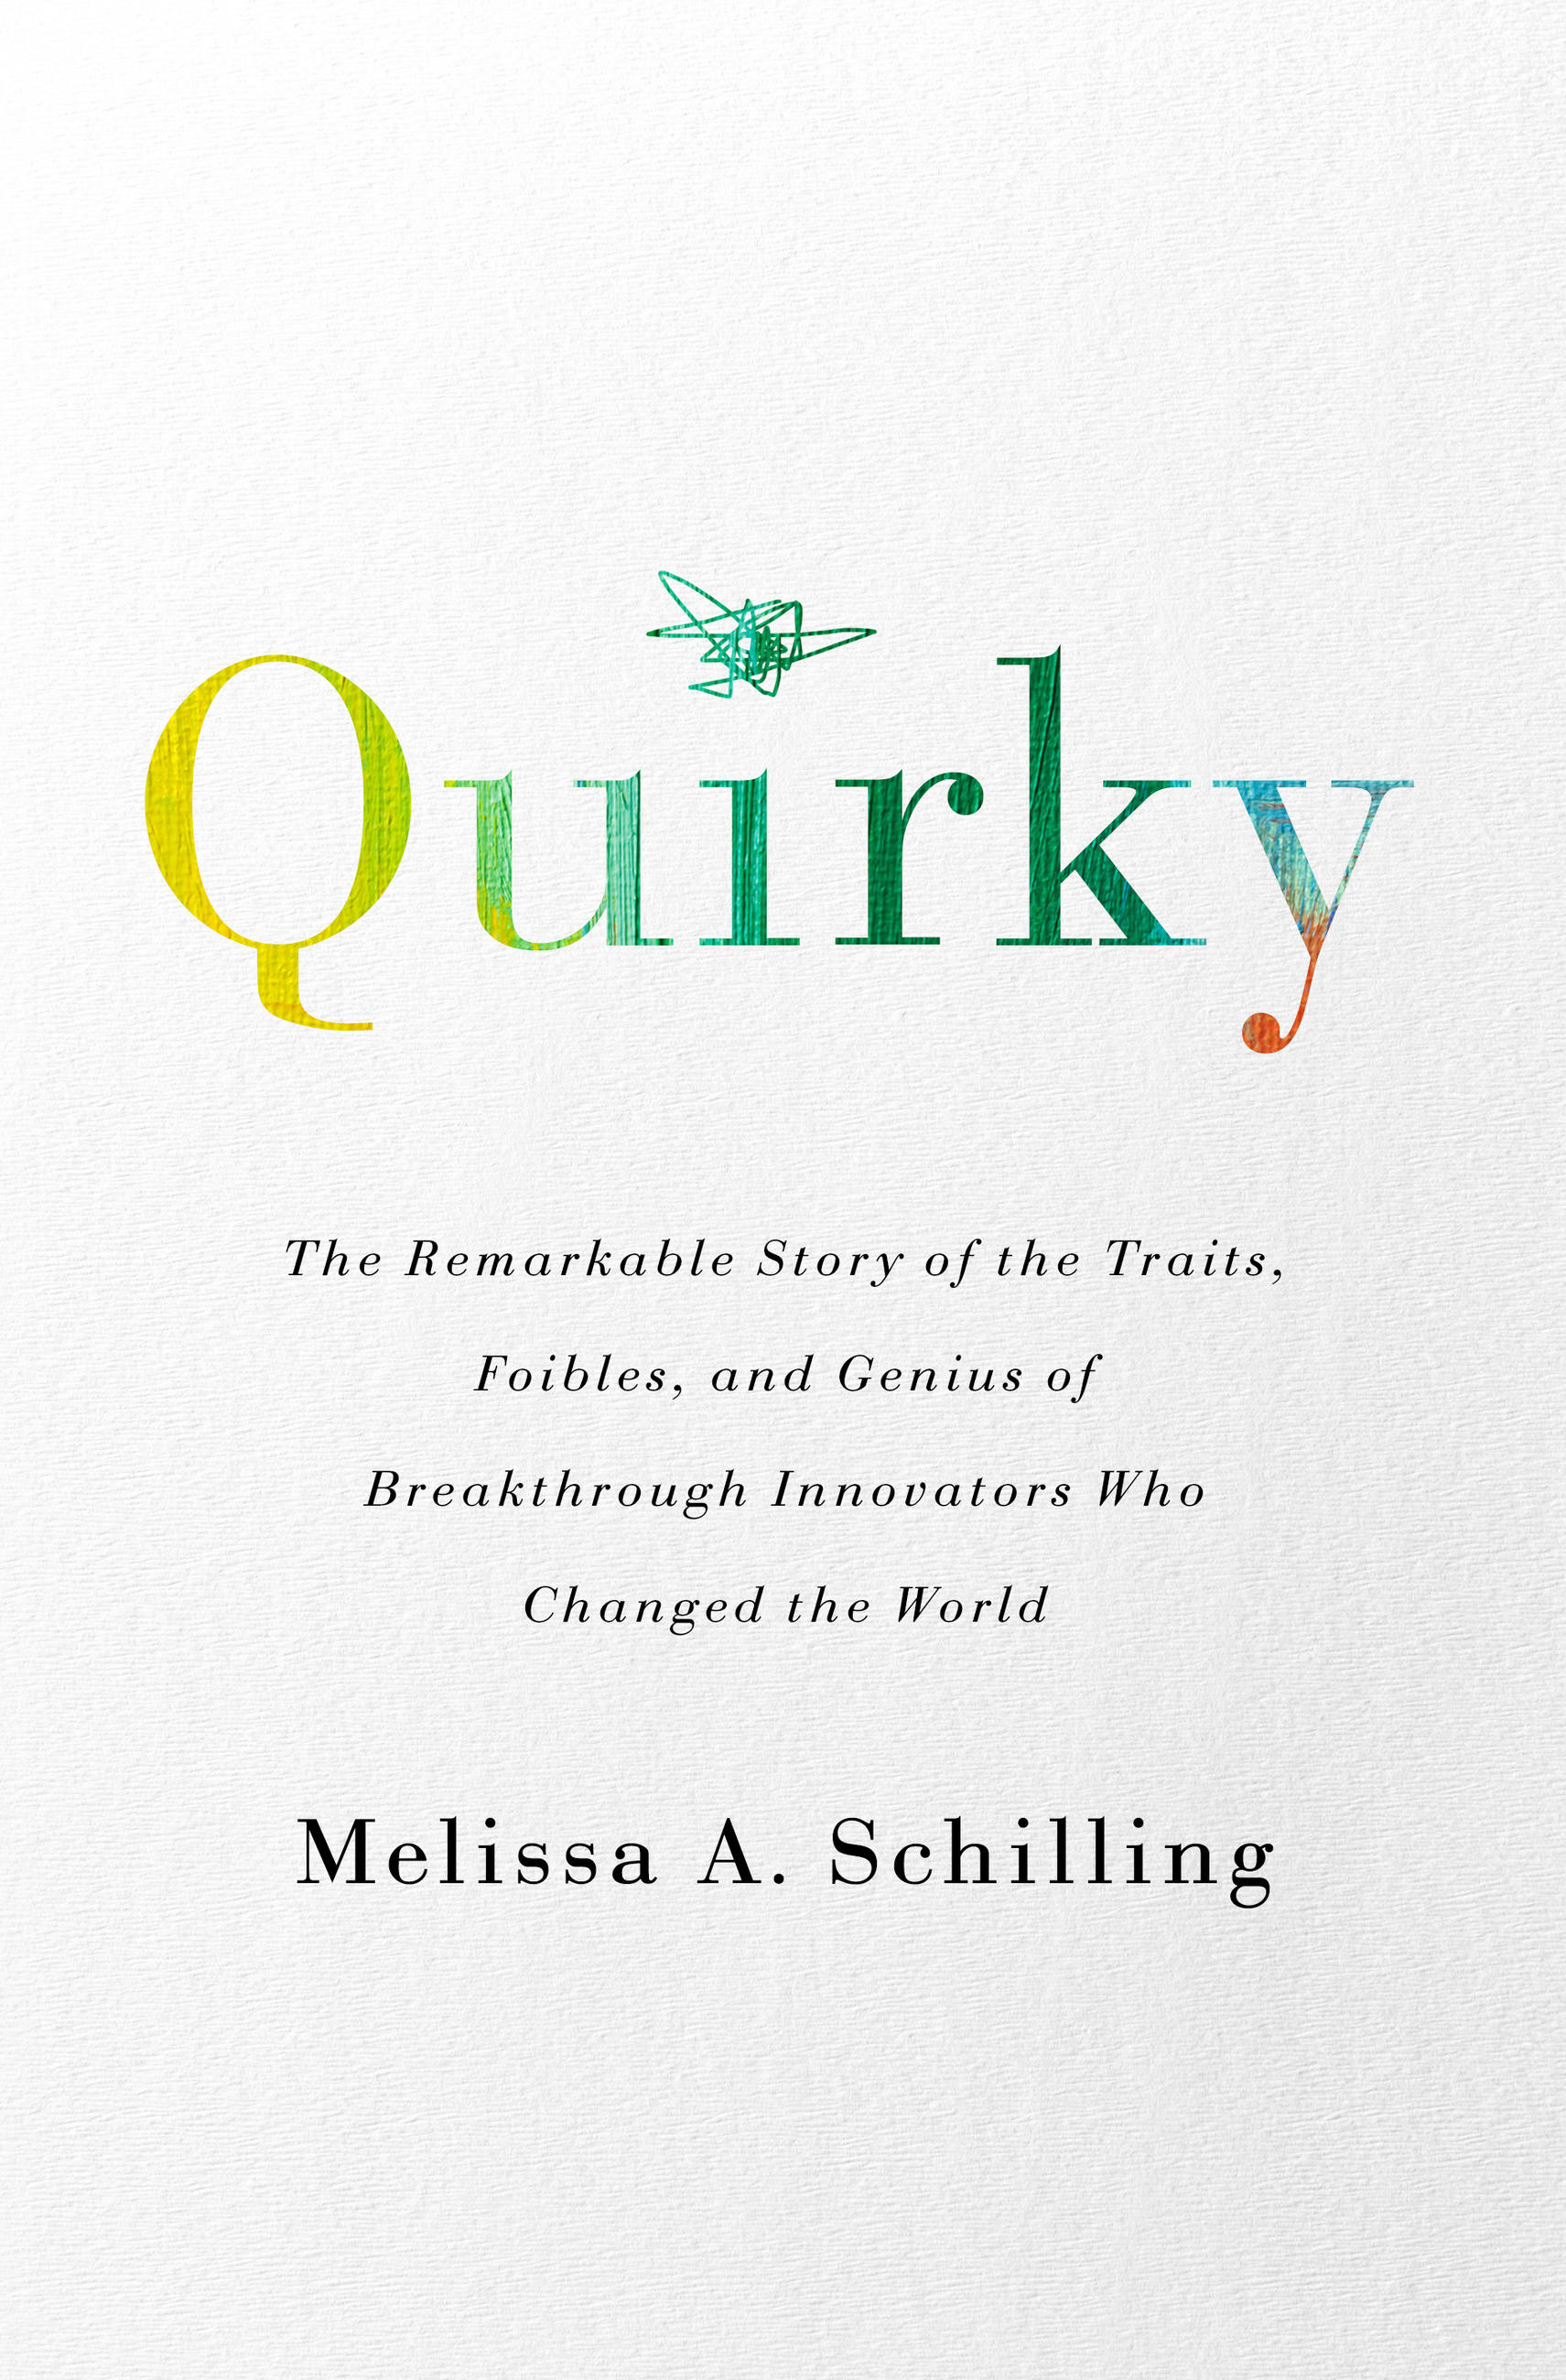 Imagen de portada para Quirky [electronic resource] : The Remarkable Story of the Traits, Foibles, and Genius of Breakthrough Innovators Who Changed the World